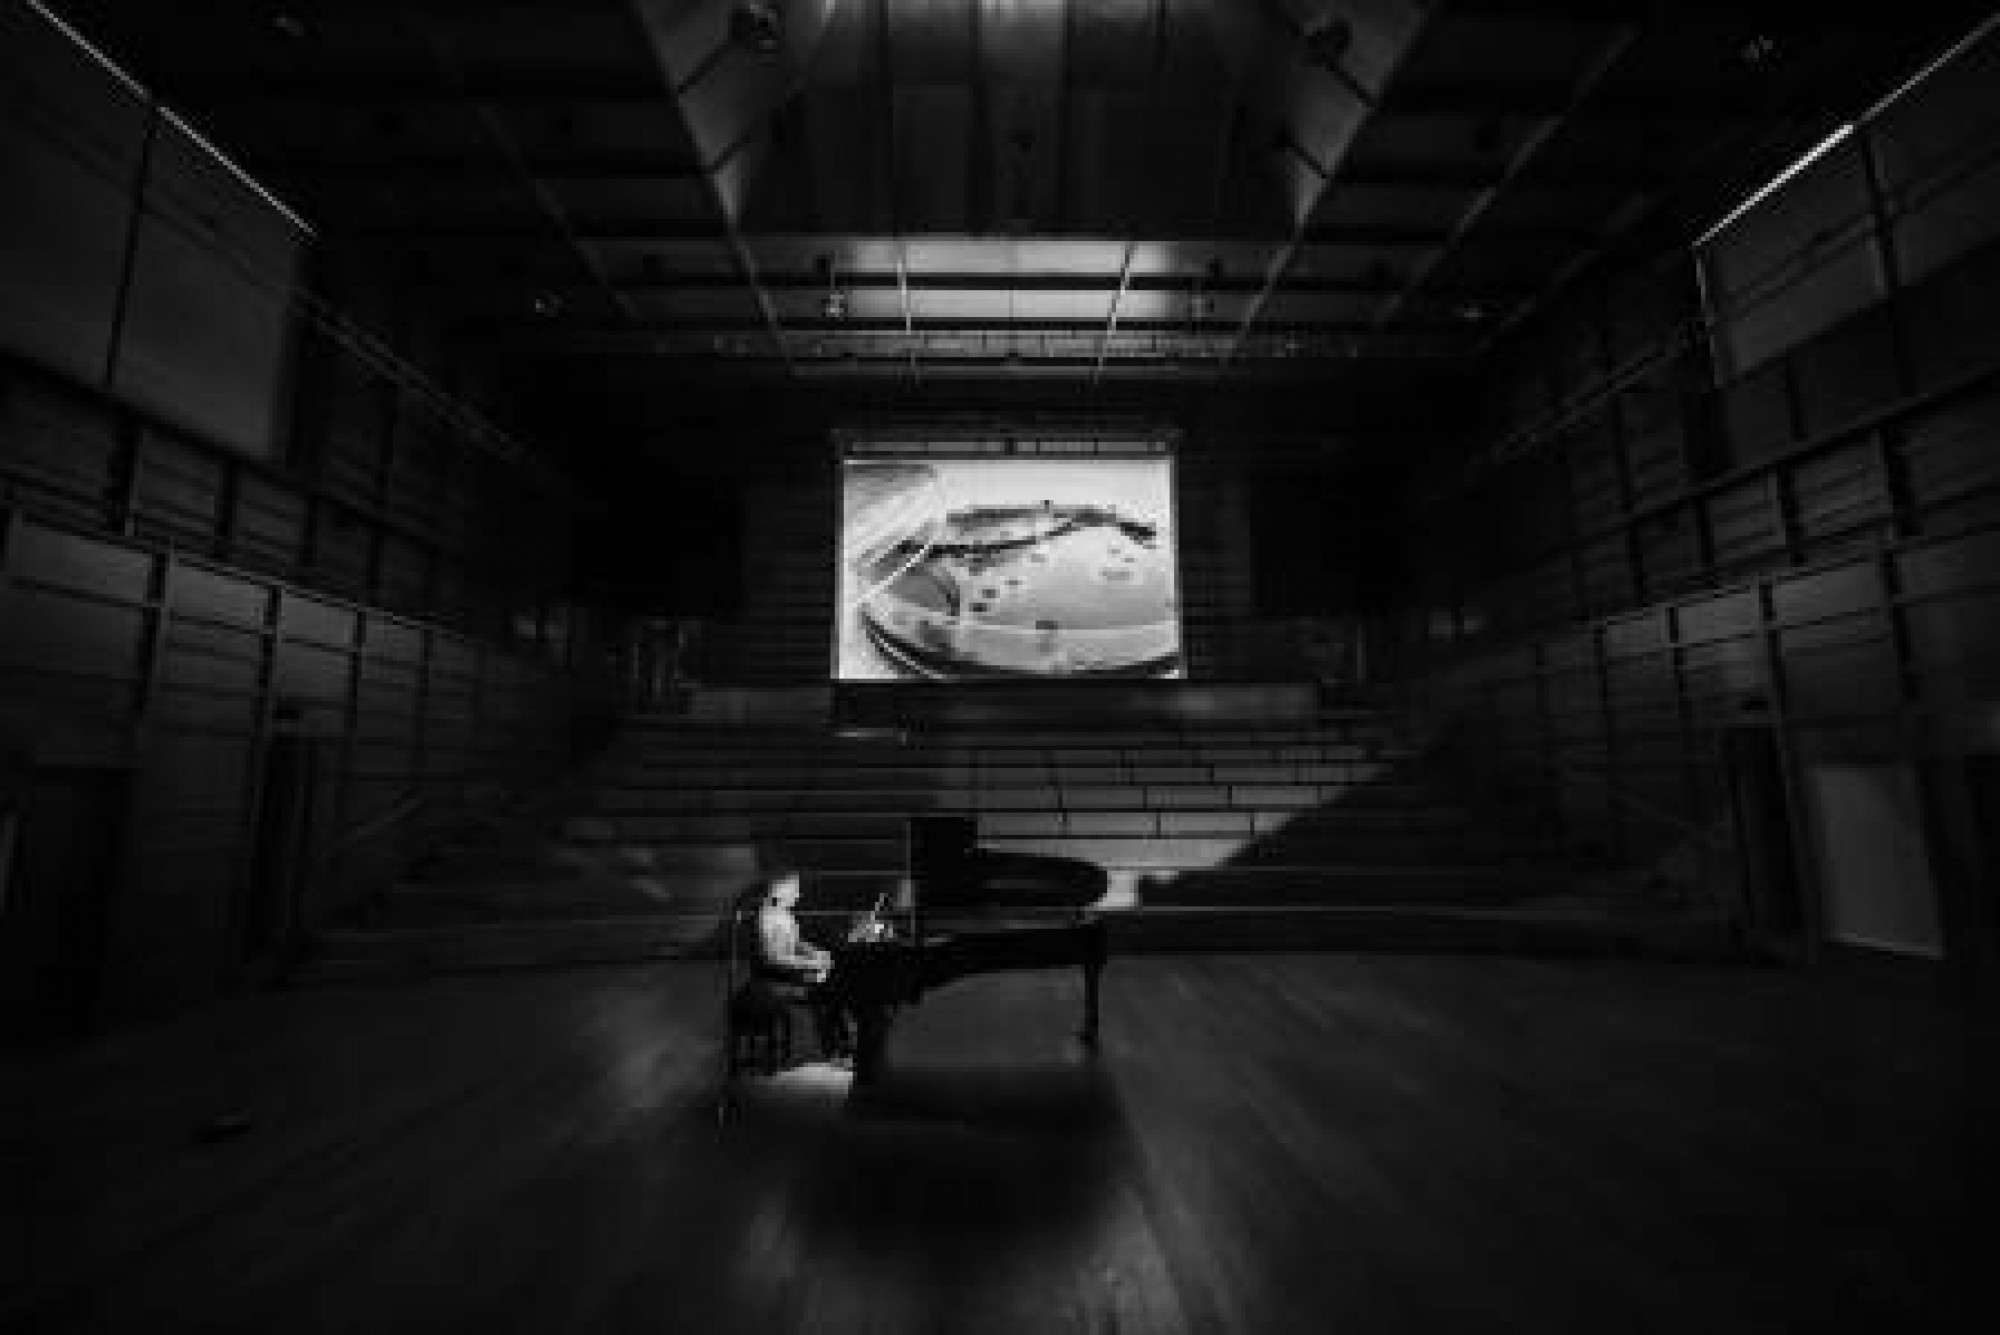 Pianist Dan Harding performing in Colyer-Fergusson Hall